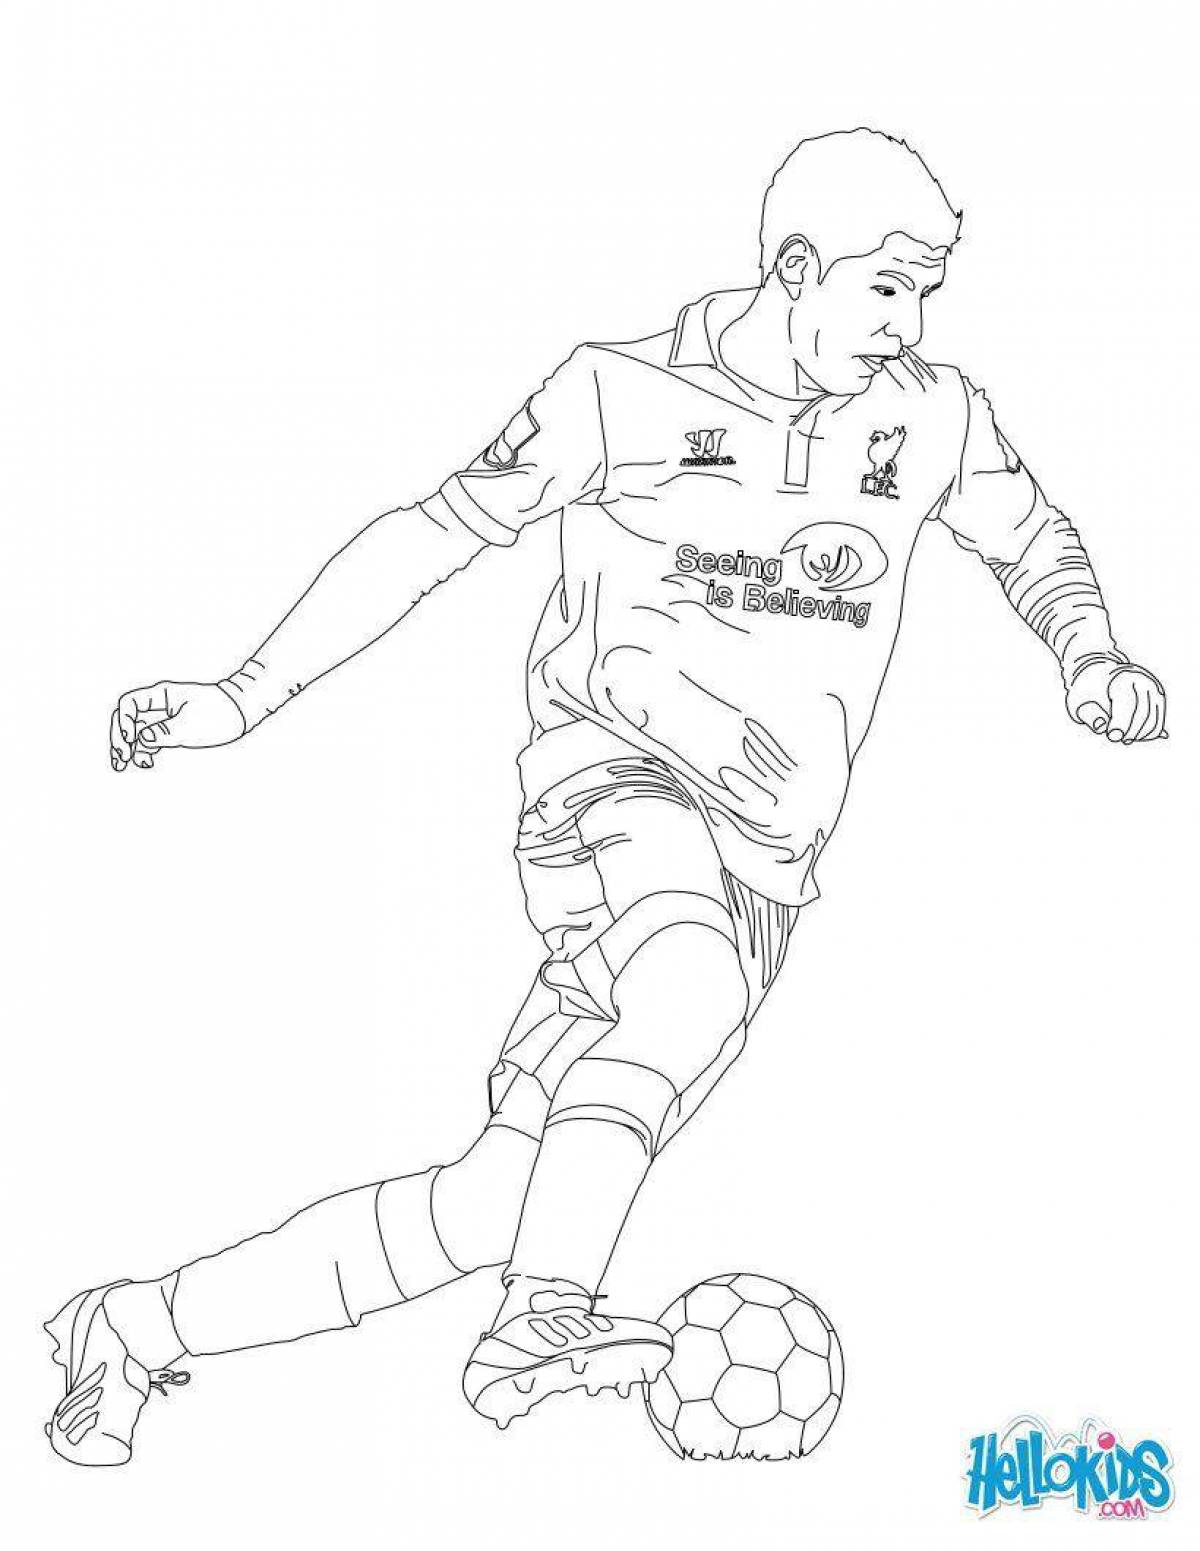 Crazy football player coloring page